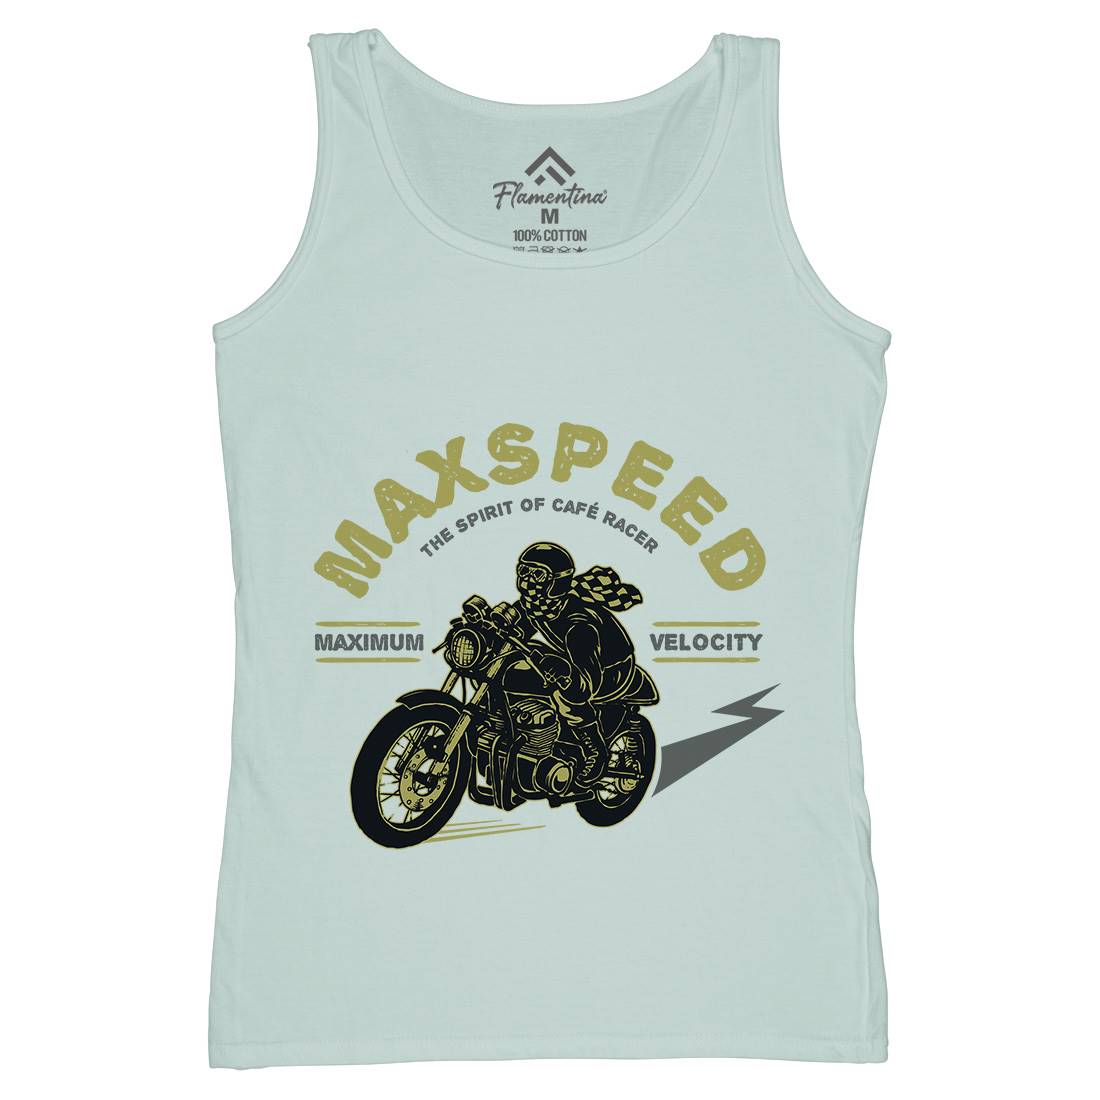 Max Speed Womens Organic Tank Top Vest Motorcycles A343